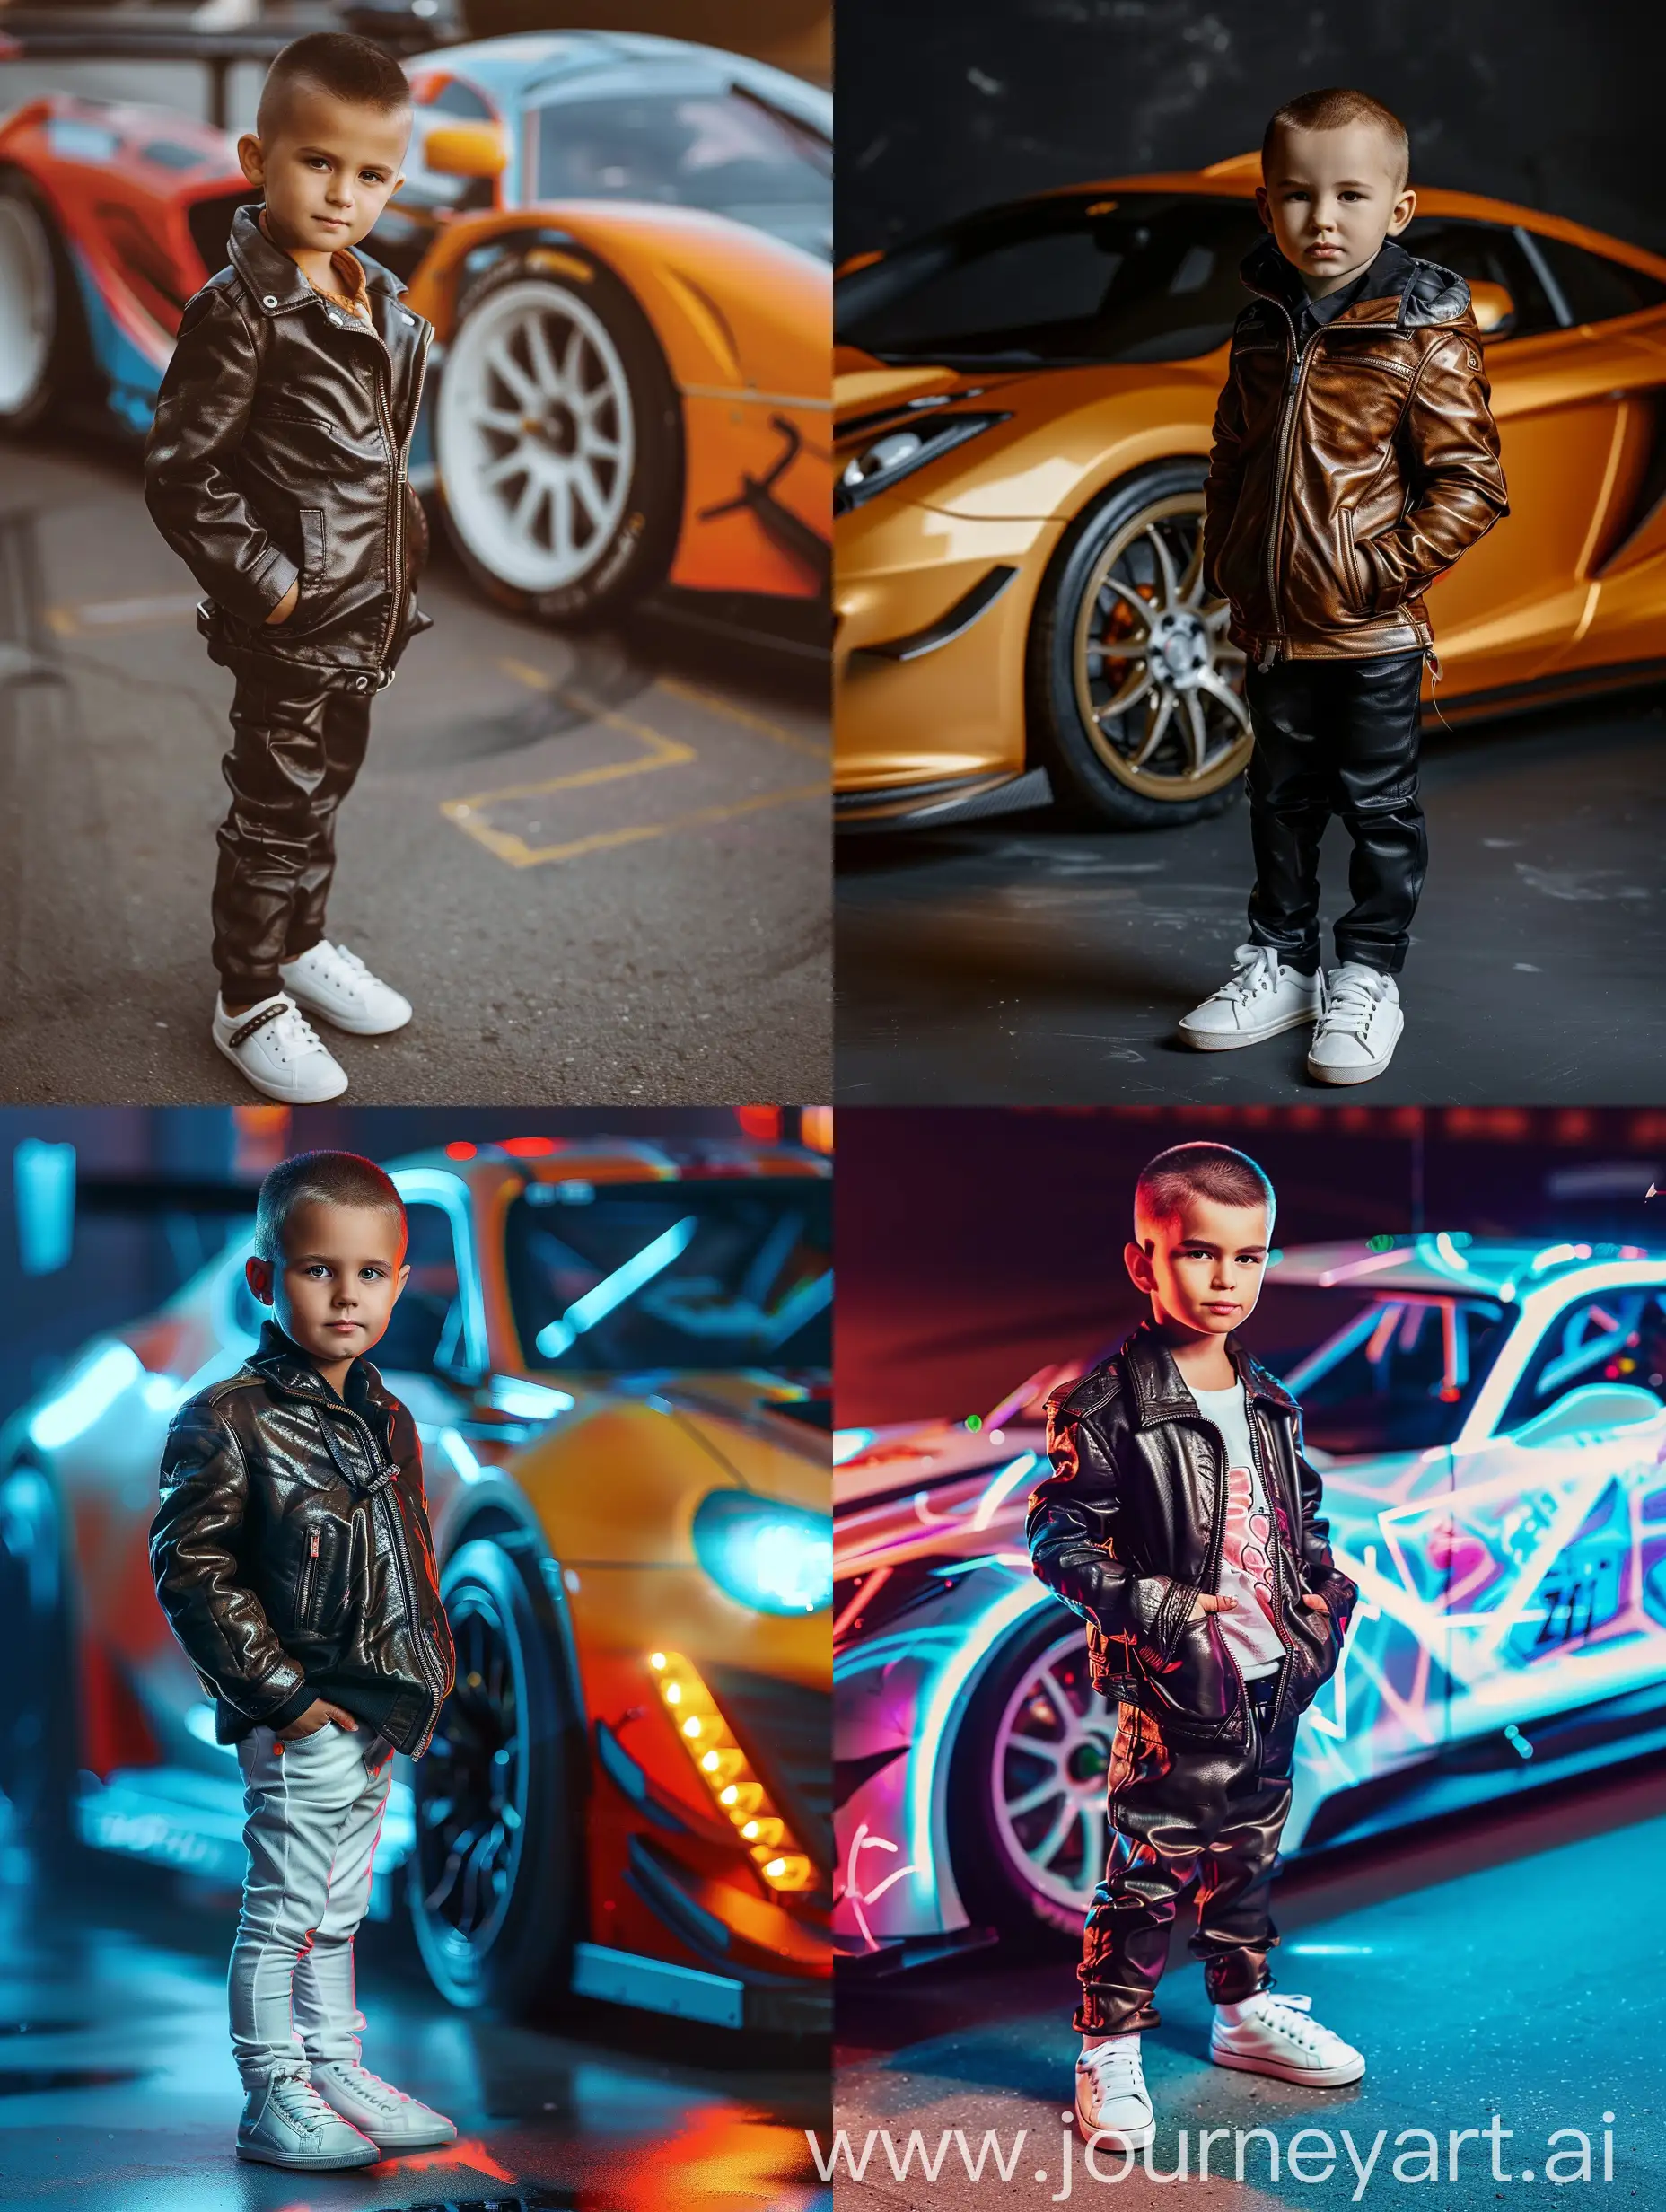 Cool-Street-Racing-Kid-Poses-with-Bright-Racing-Car